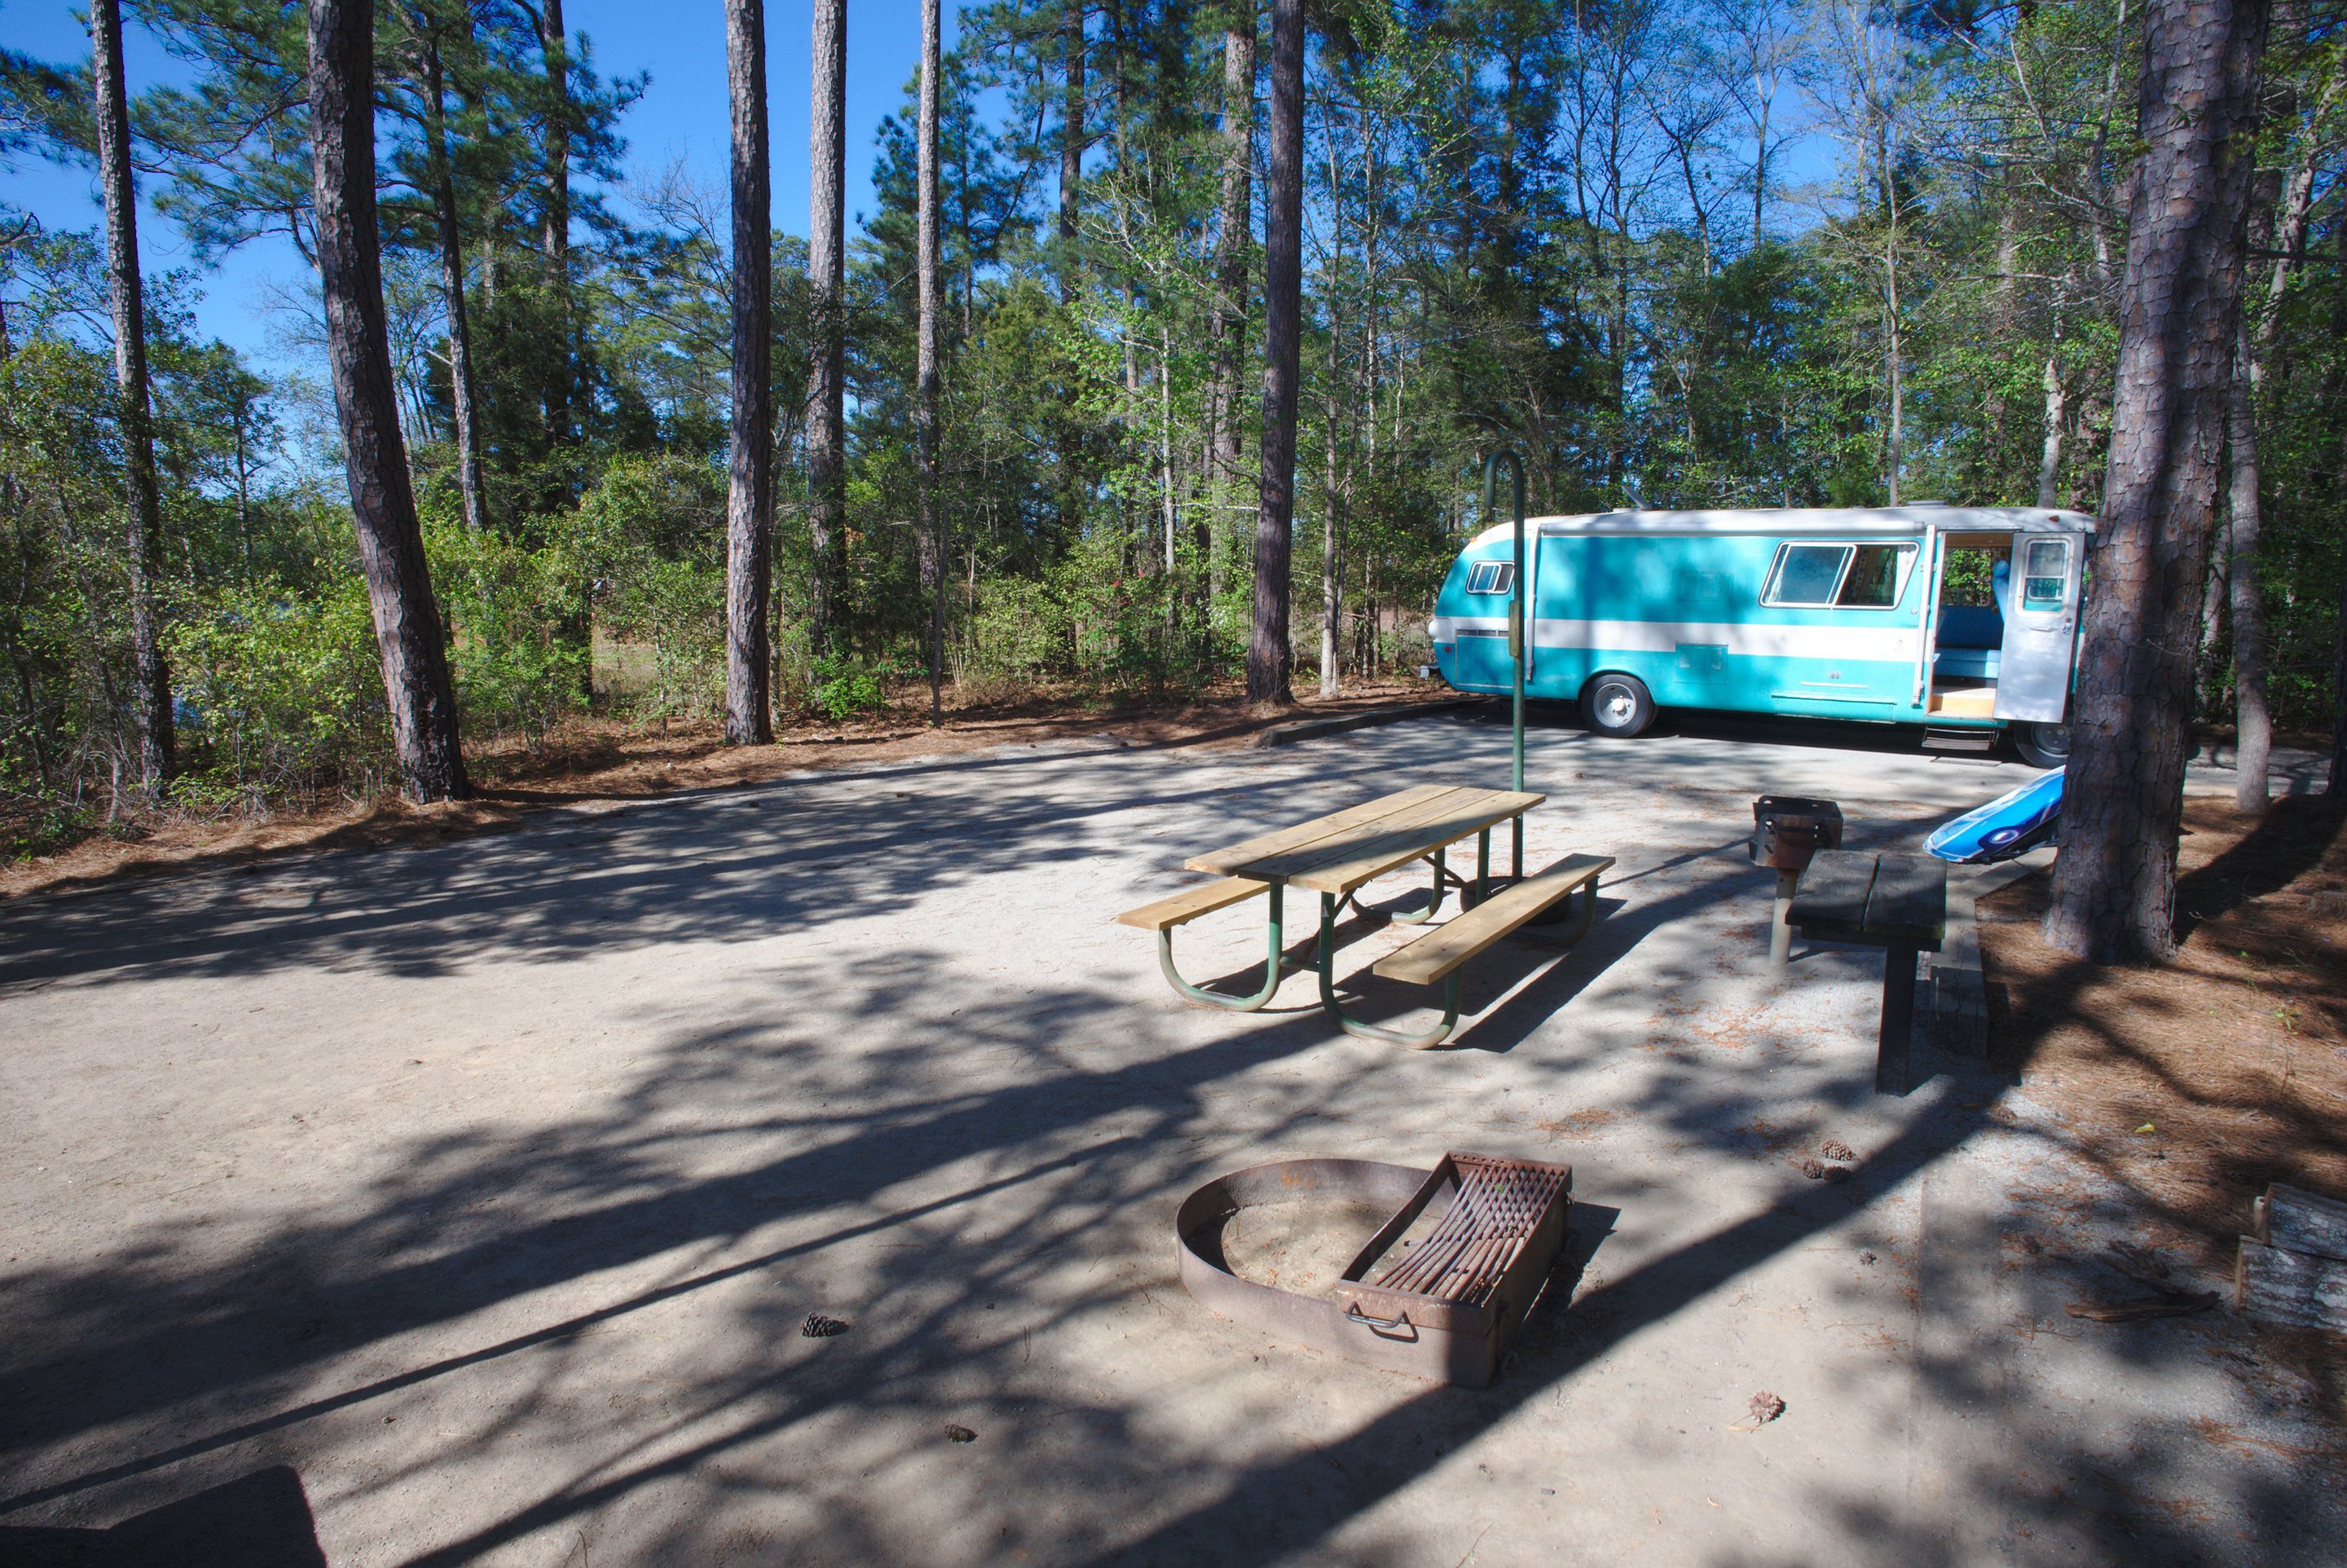 1969 Dodge Travco at Raysville campground, GA photographed by luxagraf